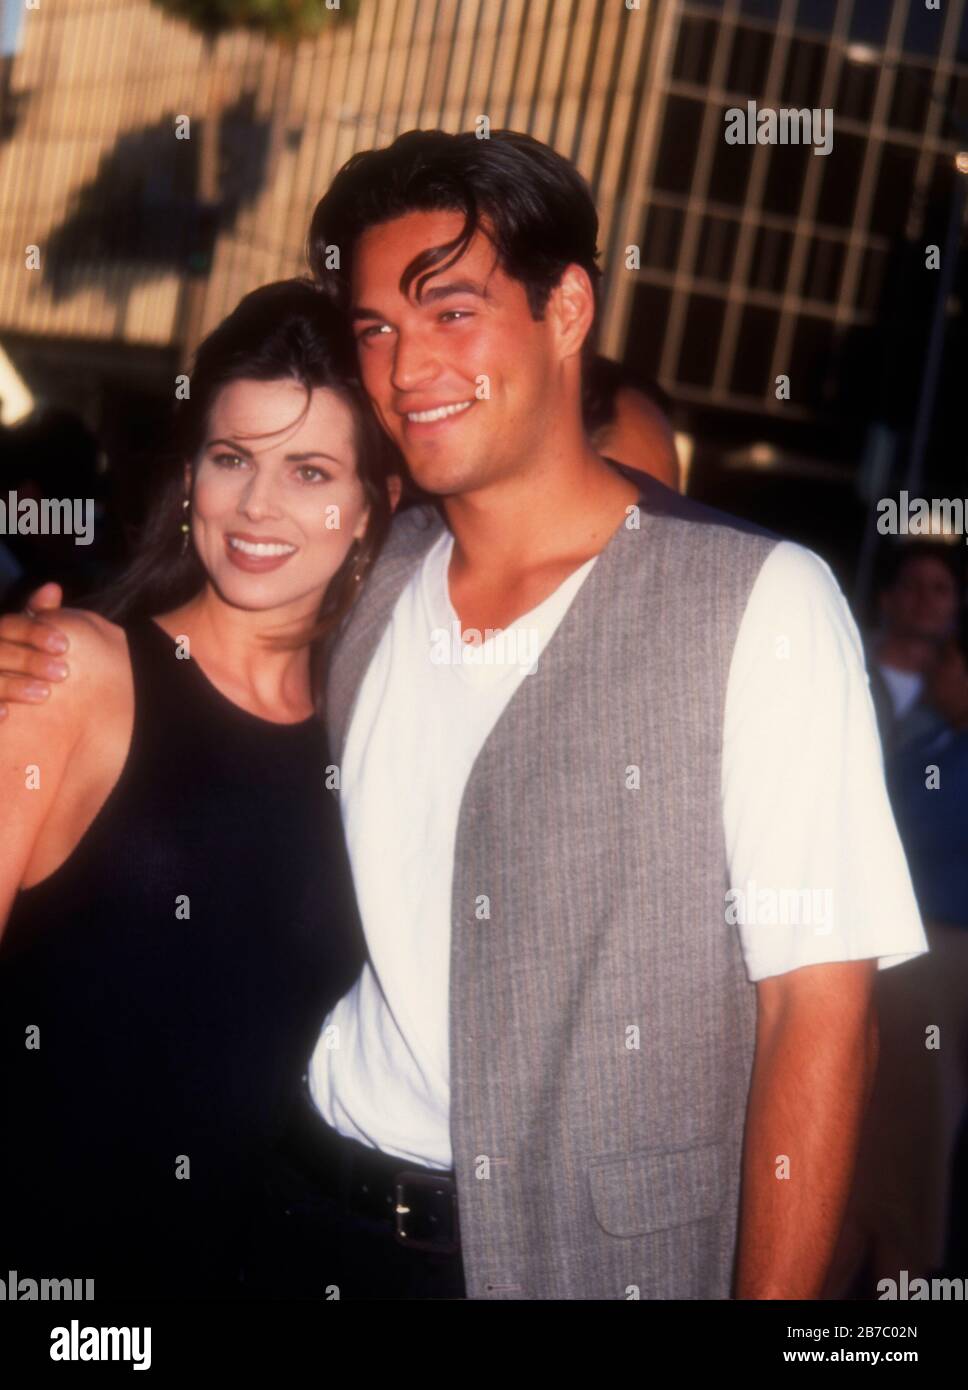 Beverly Hills, California, USA 25th July 1995 Actress Julianne Morris and actor Eddie Cibrian attend Columbia Pictures 'The Net' Premierre on July 25, 1995 at the Samuel Goldwyn Theater in Beverly Hills, California, USA. Photo by Barry King/Alamy Stock Photo Stock Photo